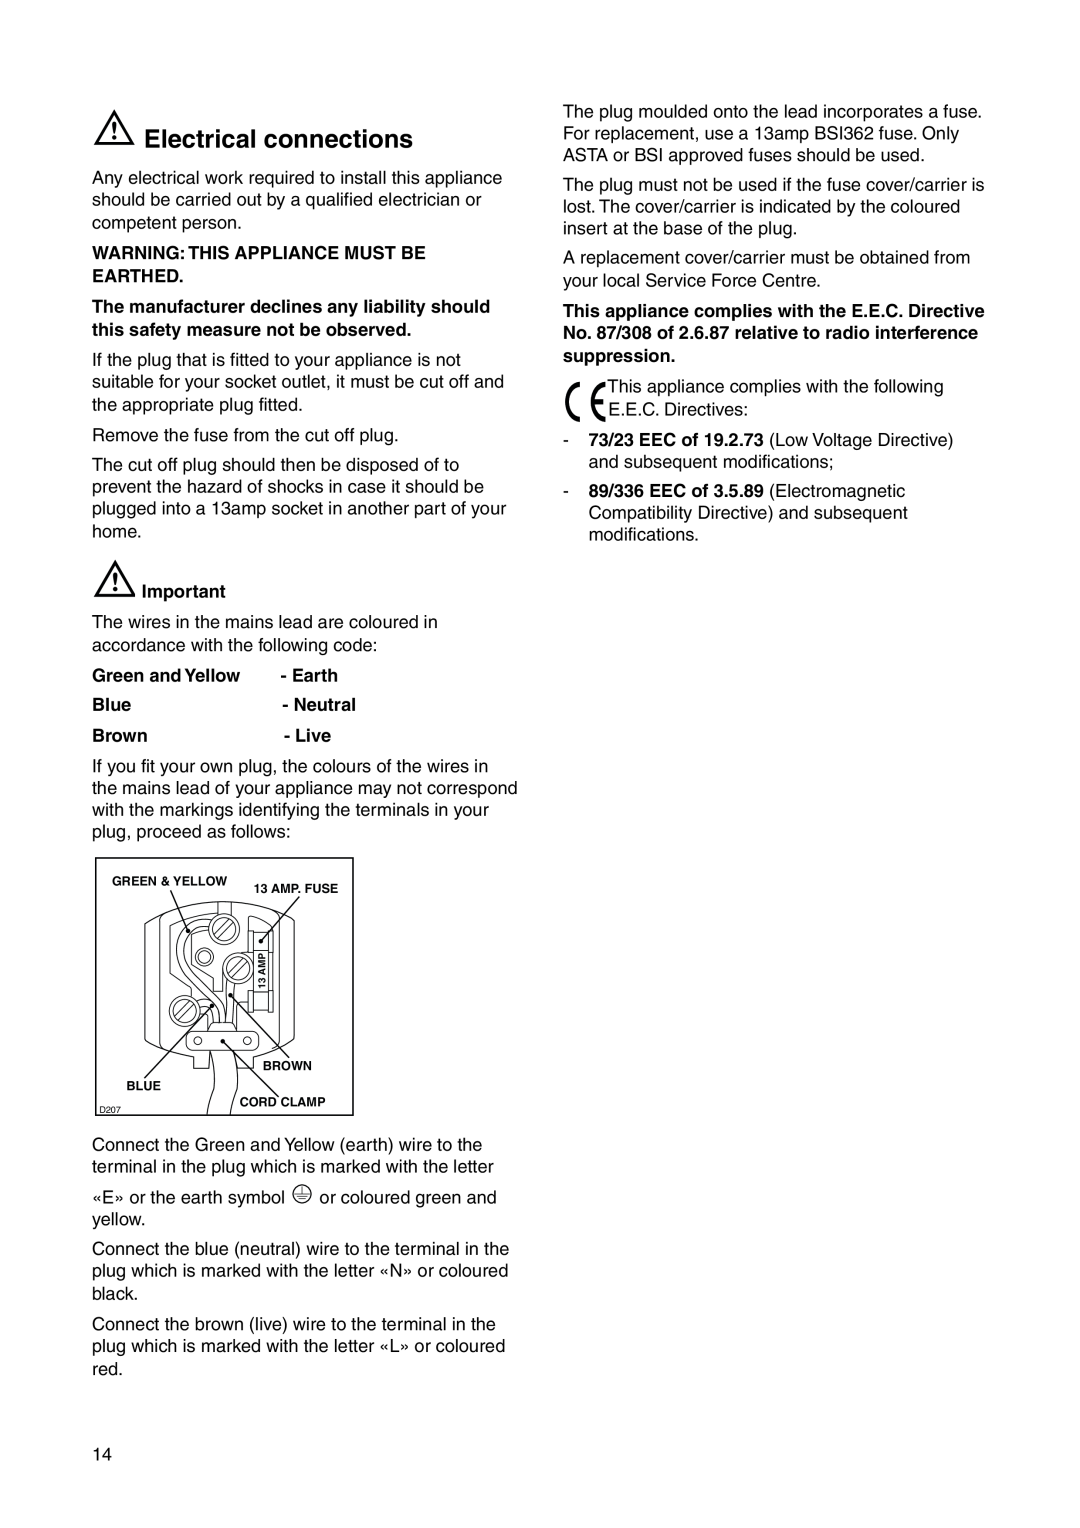 Electrolux EUF 23800 user manual Electrical connections, Warning This Appliance Must Be Earthed, Green and Yellow 